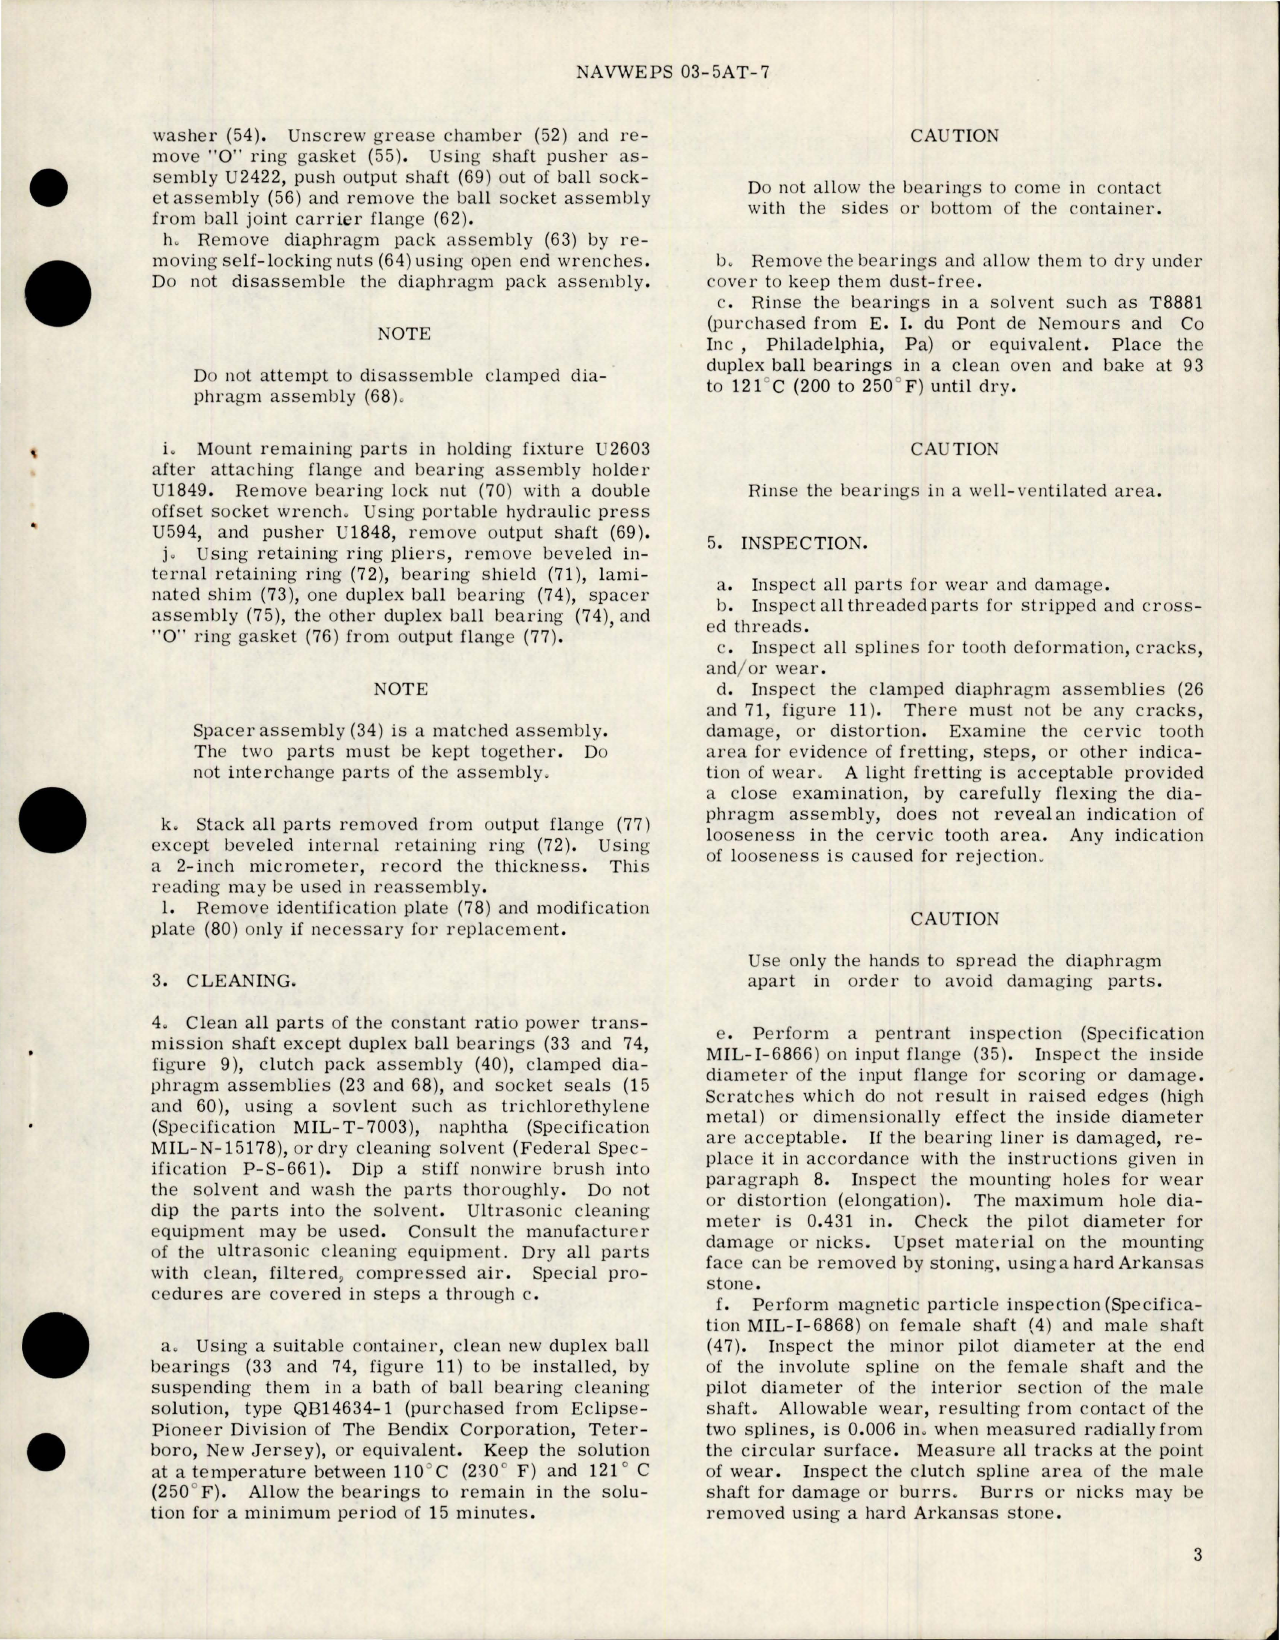 Sample page 5 from AirCorps Library document: Overhaul Instructions with Parts Breakdown for Constant Ratio Power Transmission Shaft